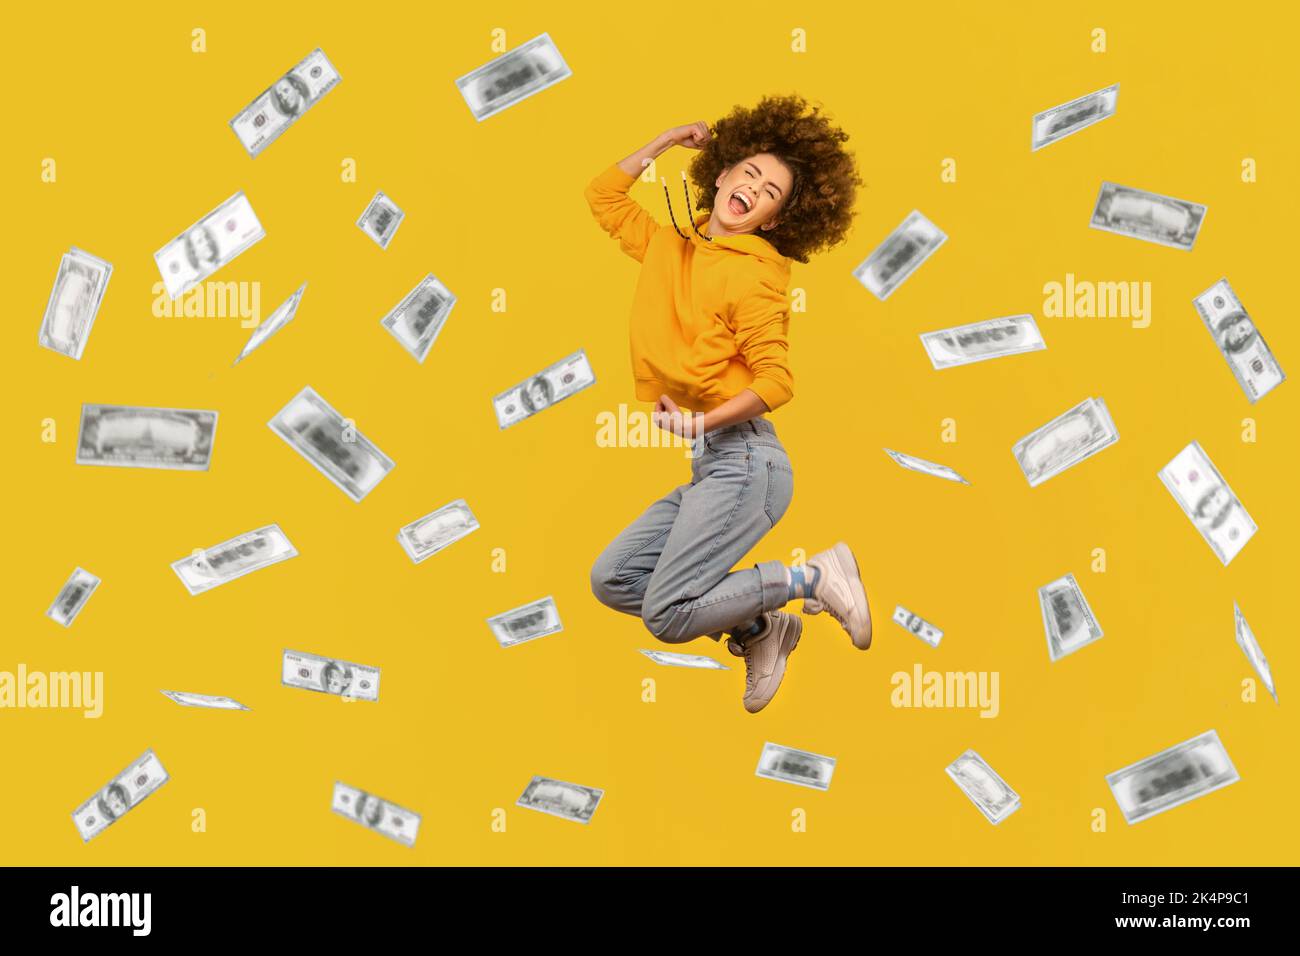 Portrait of successful rich woman with Afro hairstyle jumping in money rain, celebrating her victory, clenched fists and screaming happily. Indoor studio shot isolated on yellow background. Stock Photo